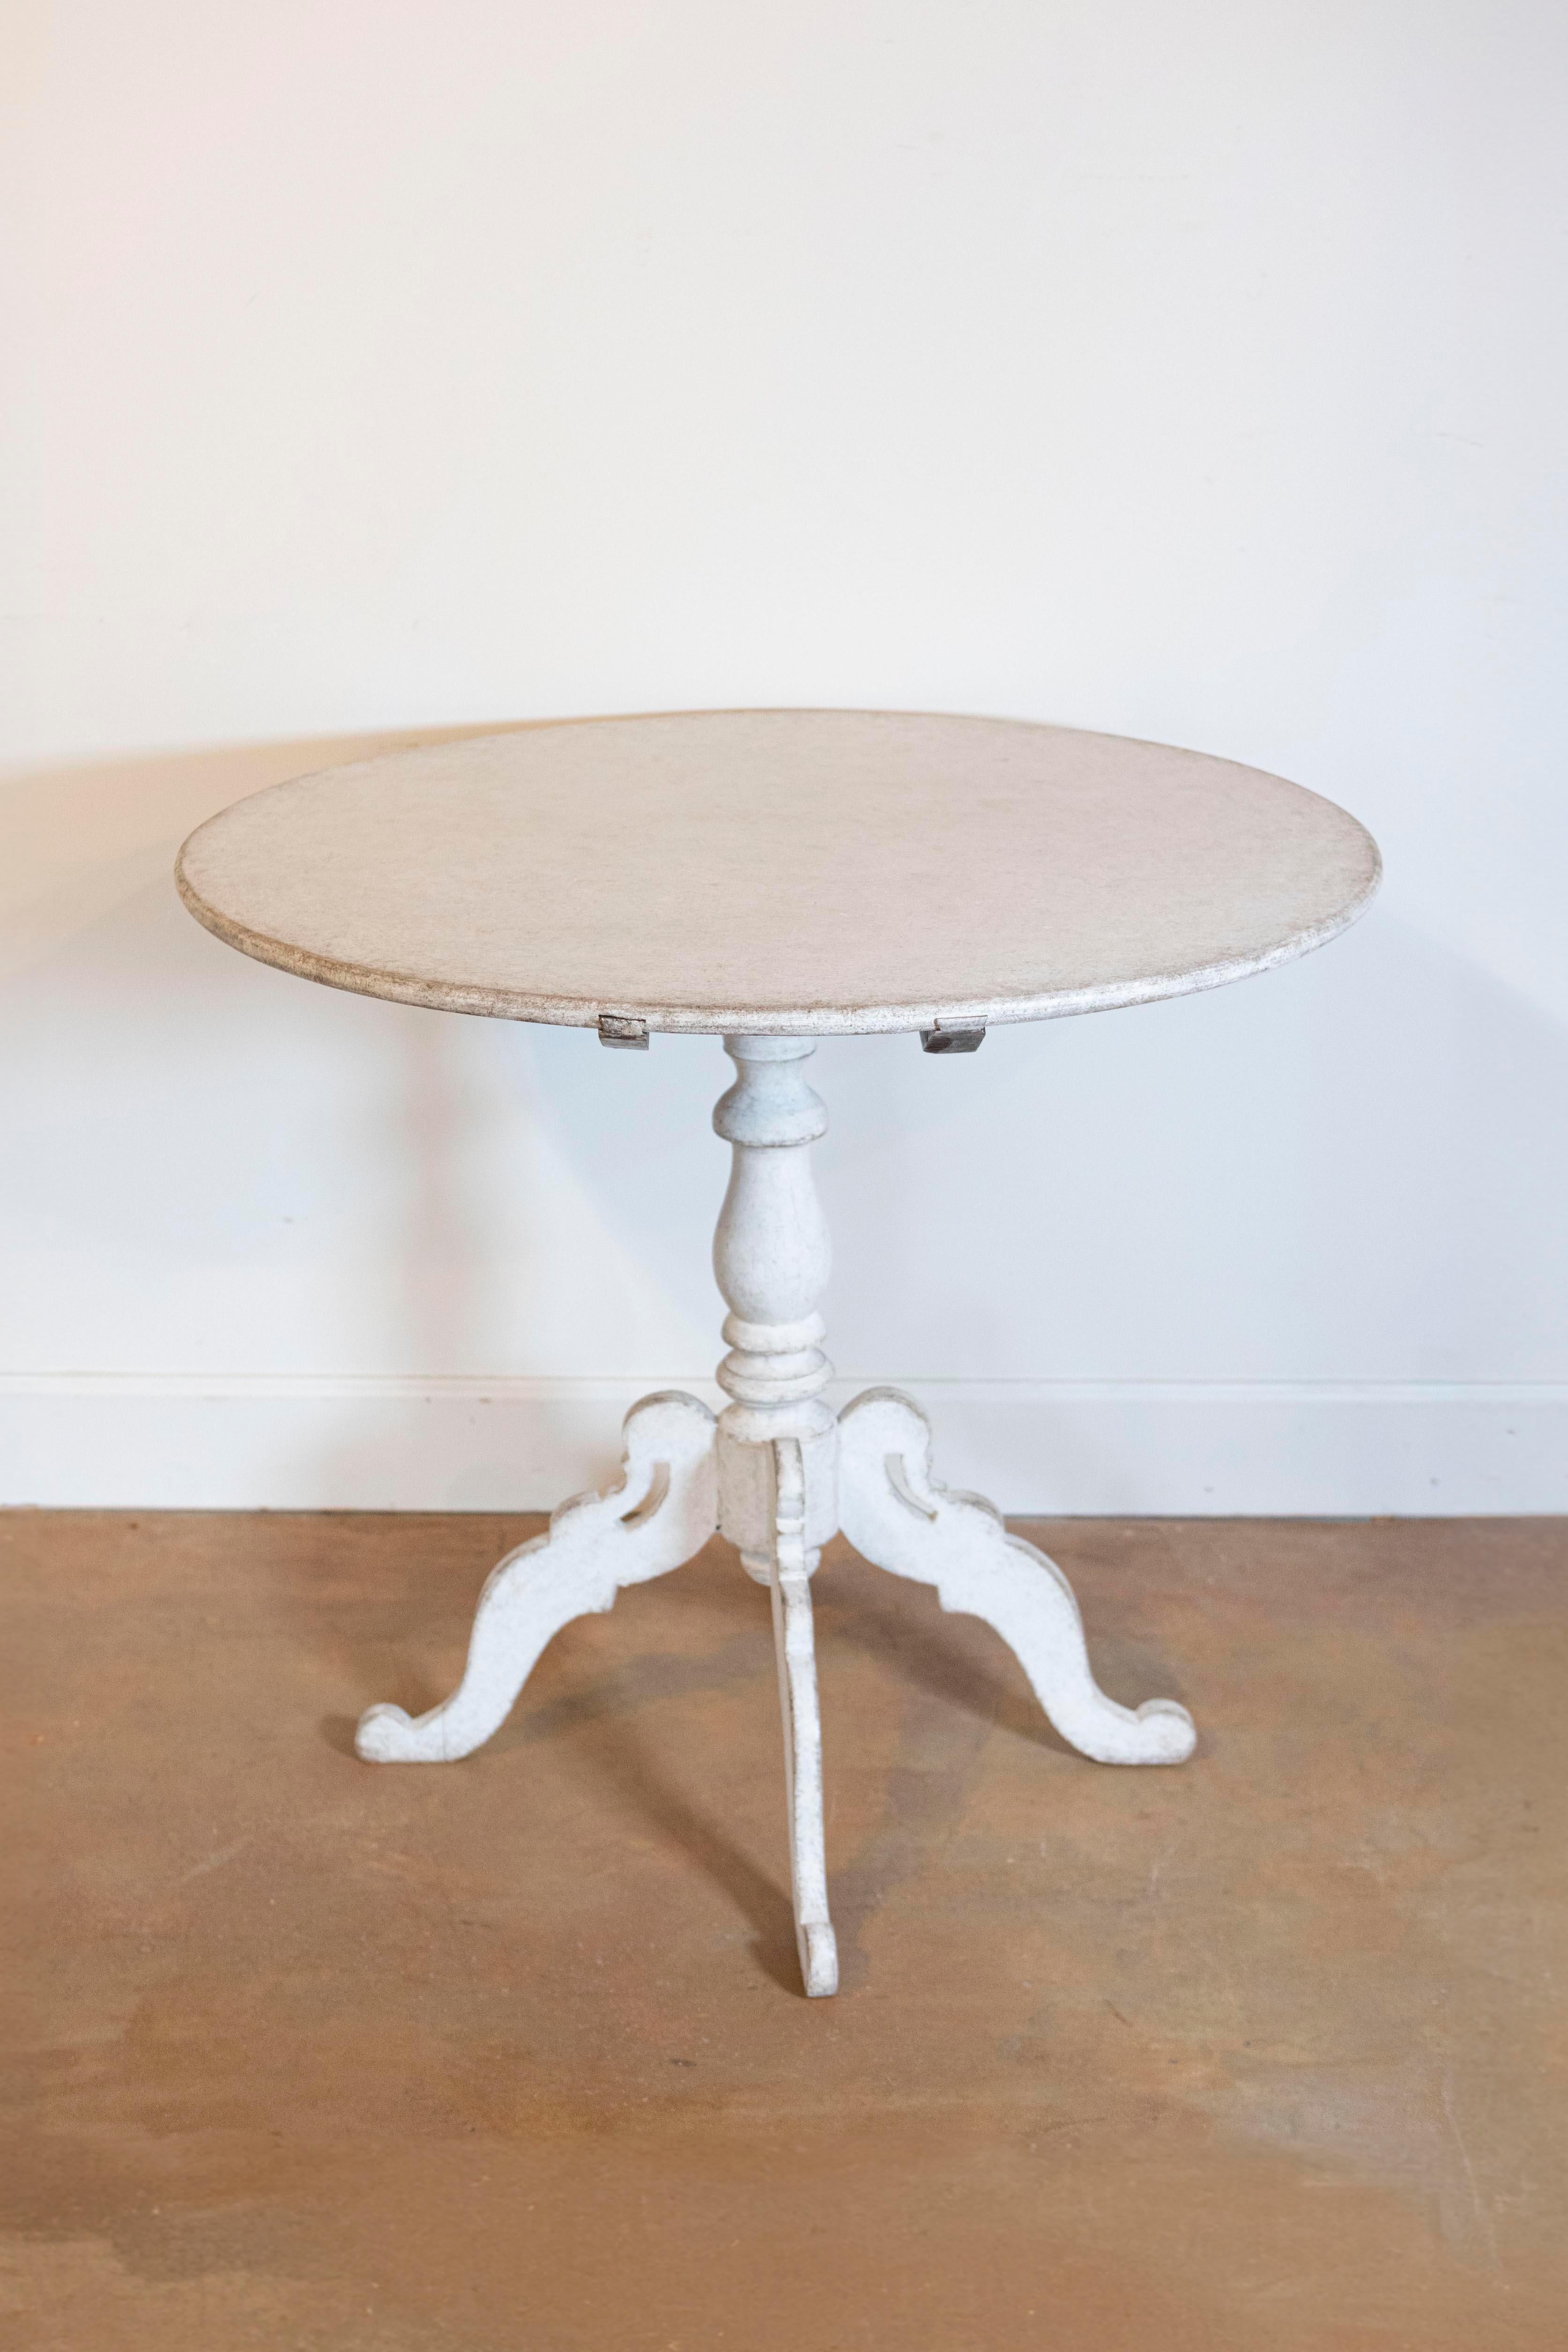 A Swedish light grey painted tilt-top table from circa 1860 with circular top and turned pedestal mounted on four carved scrolling legs. Heralding from circa 1860, this Swedish tilt-top table is a striking blend of functionality and artistry, bathed